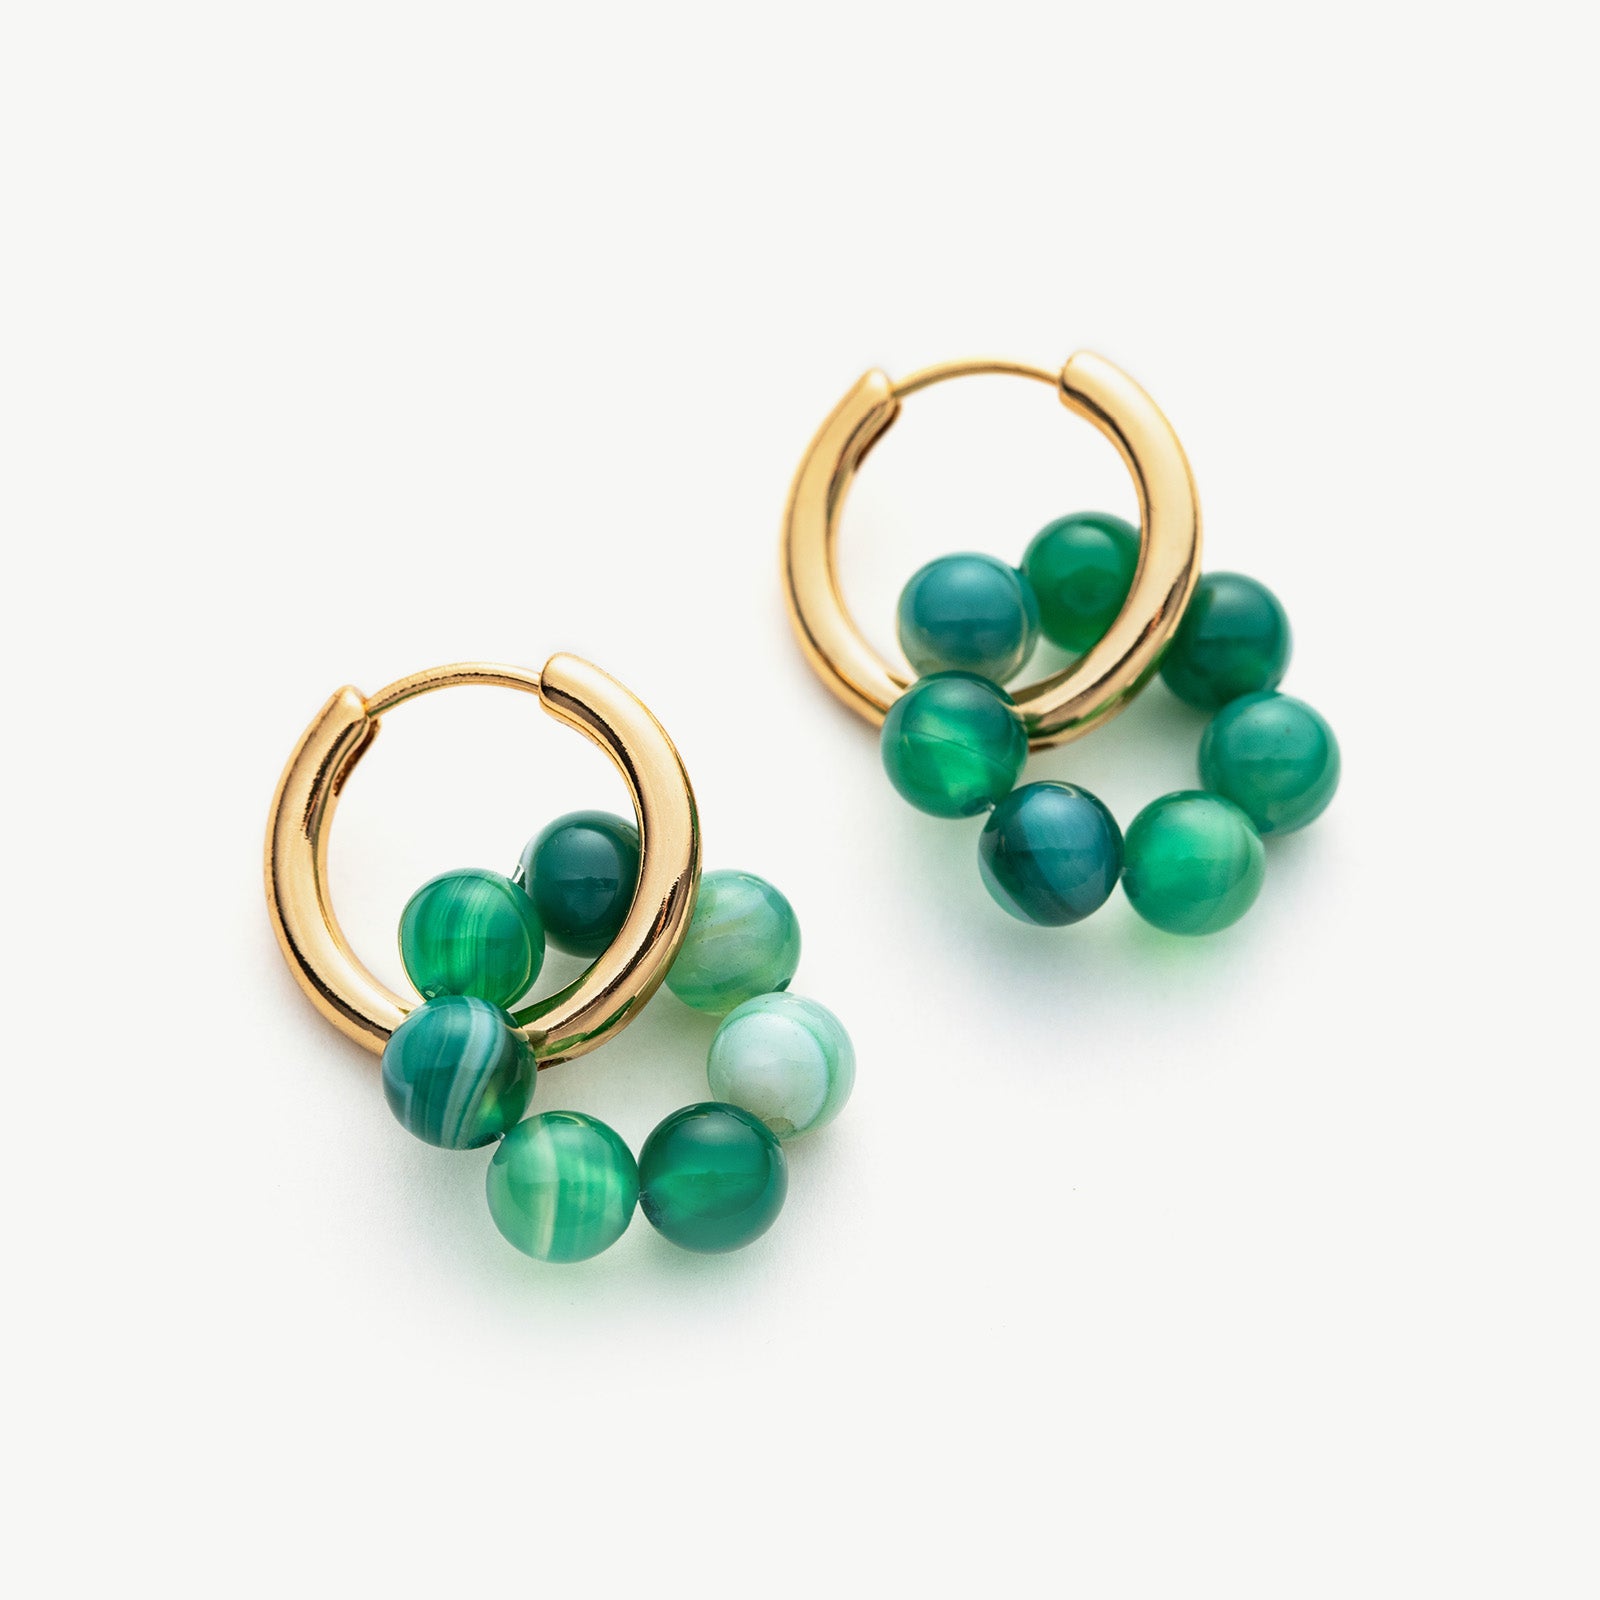 Medium Agate Hoop Earrings, radiating with the warm and vibrant hues of agate stones, these earrings offer a radiant and stylish addition to your overall look